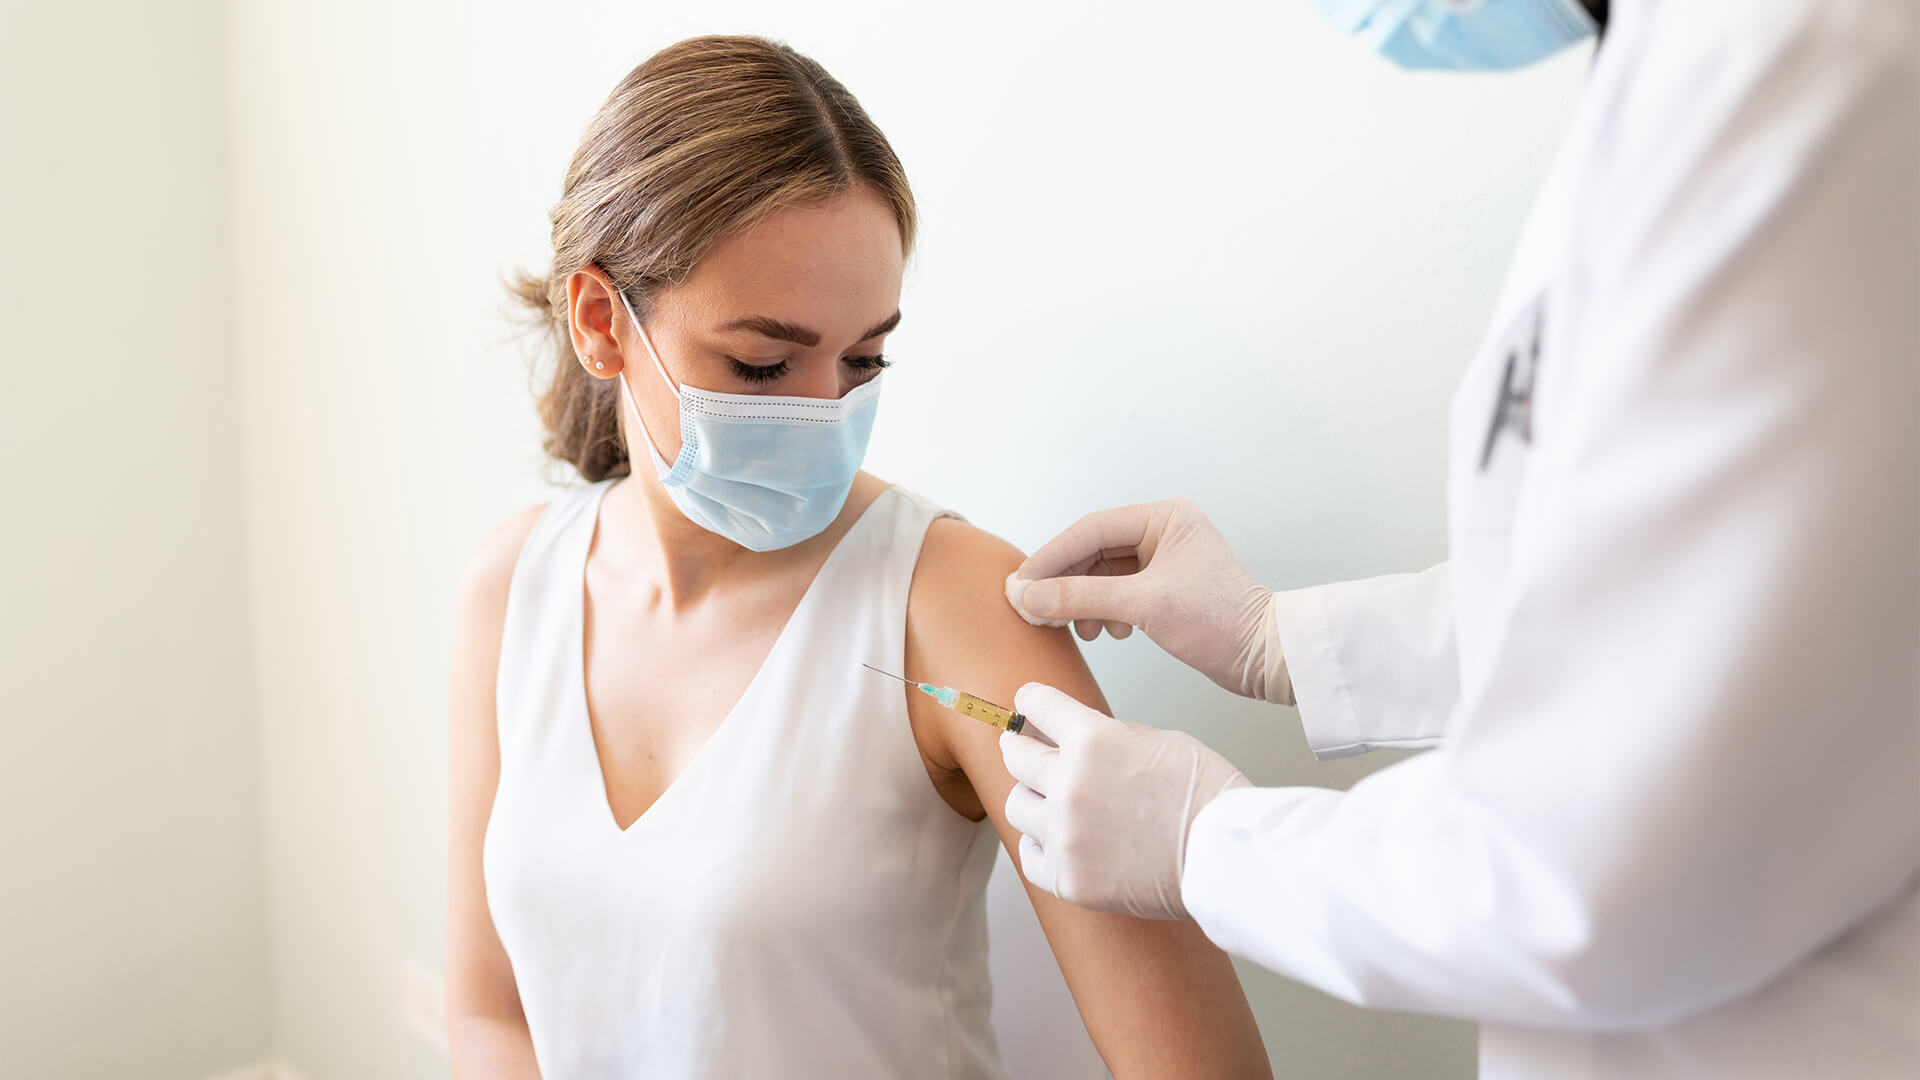 A young woman wearing a mask getting vaccinated by a doctor in a white coat and gloves. (Vaccination protects the community by preventing the spread of disease.)